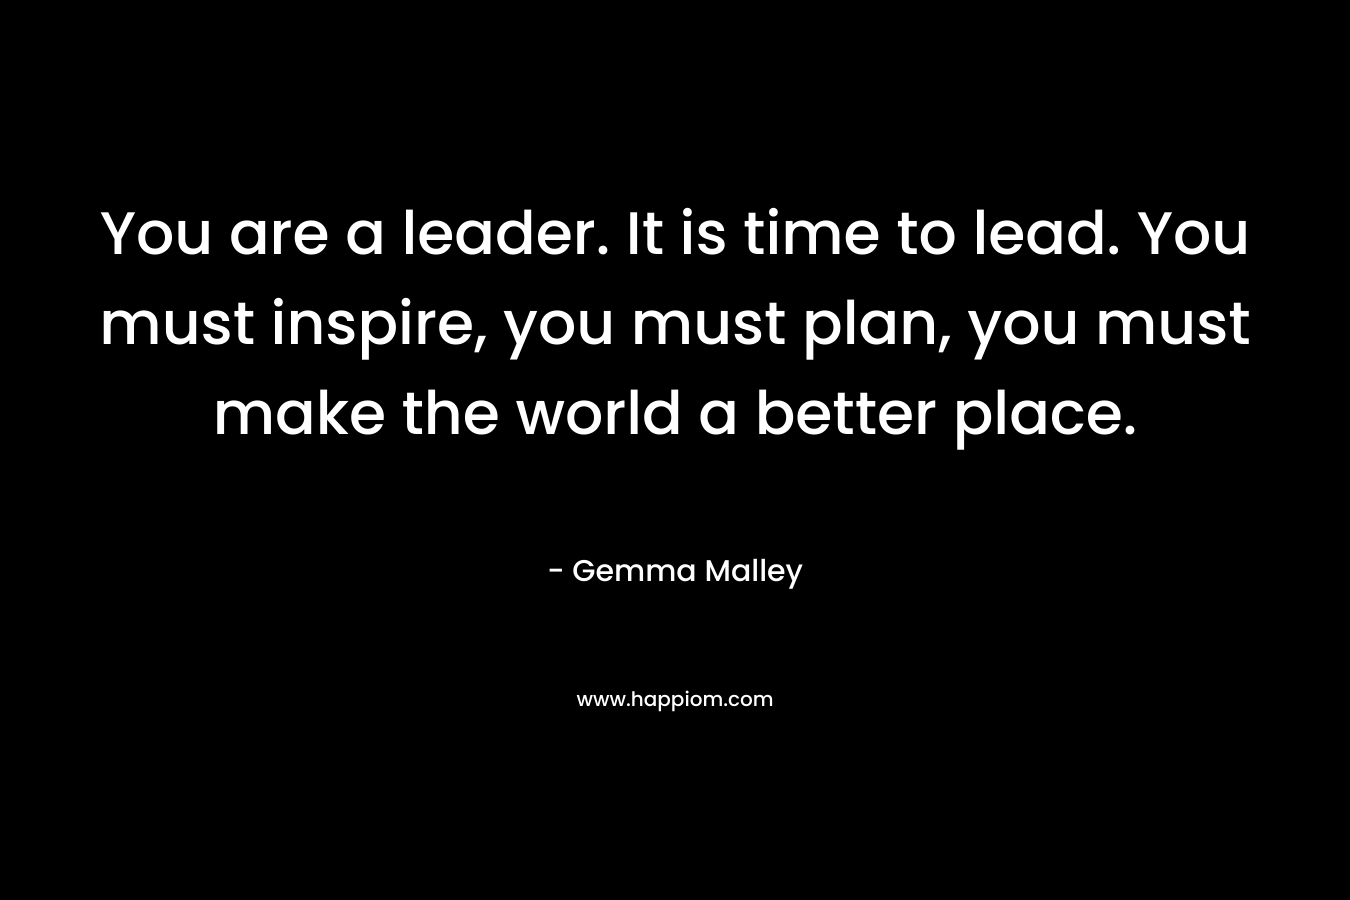 You are a leader. It is time to lead. You must inspire, you must plan, you must make the world a better place.